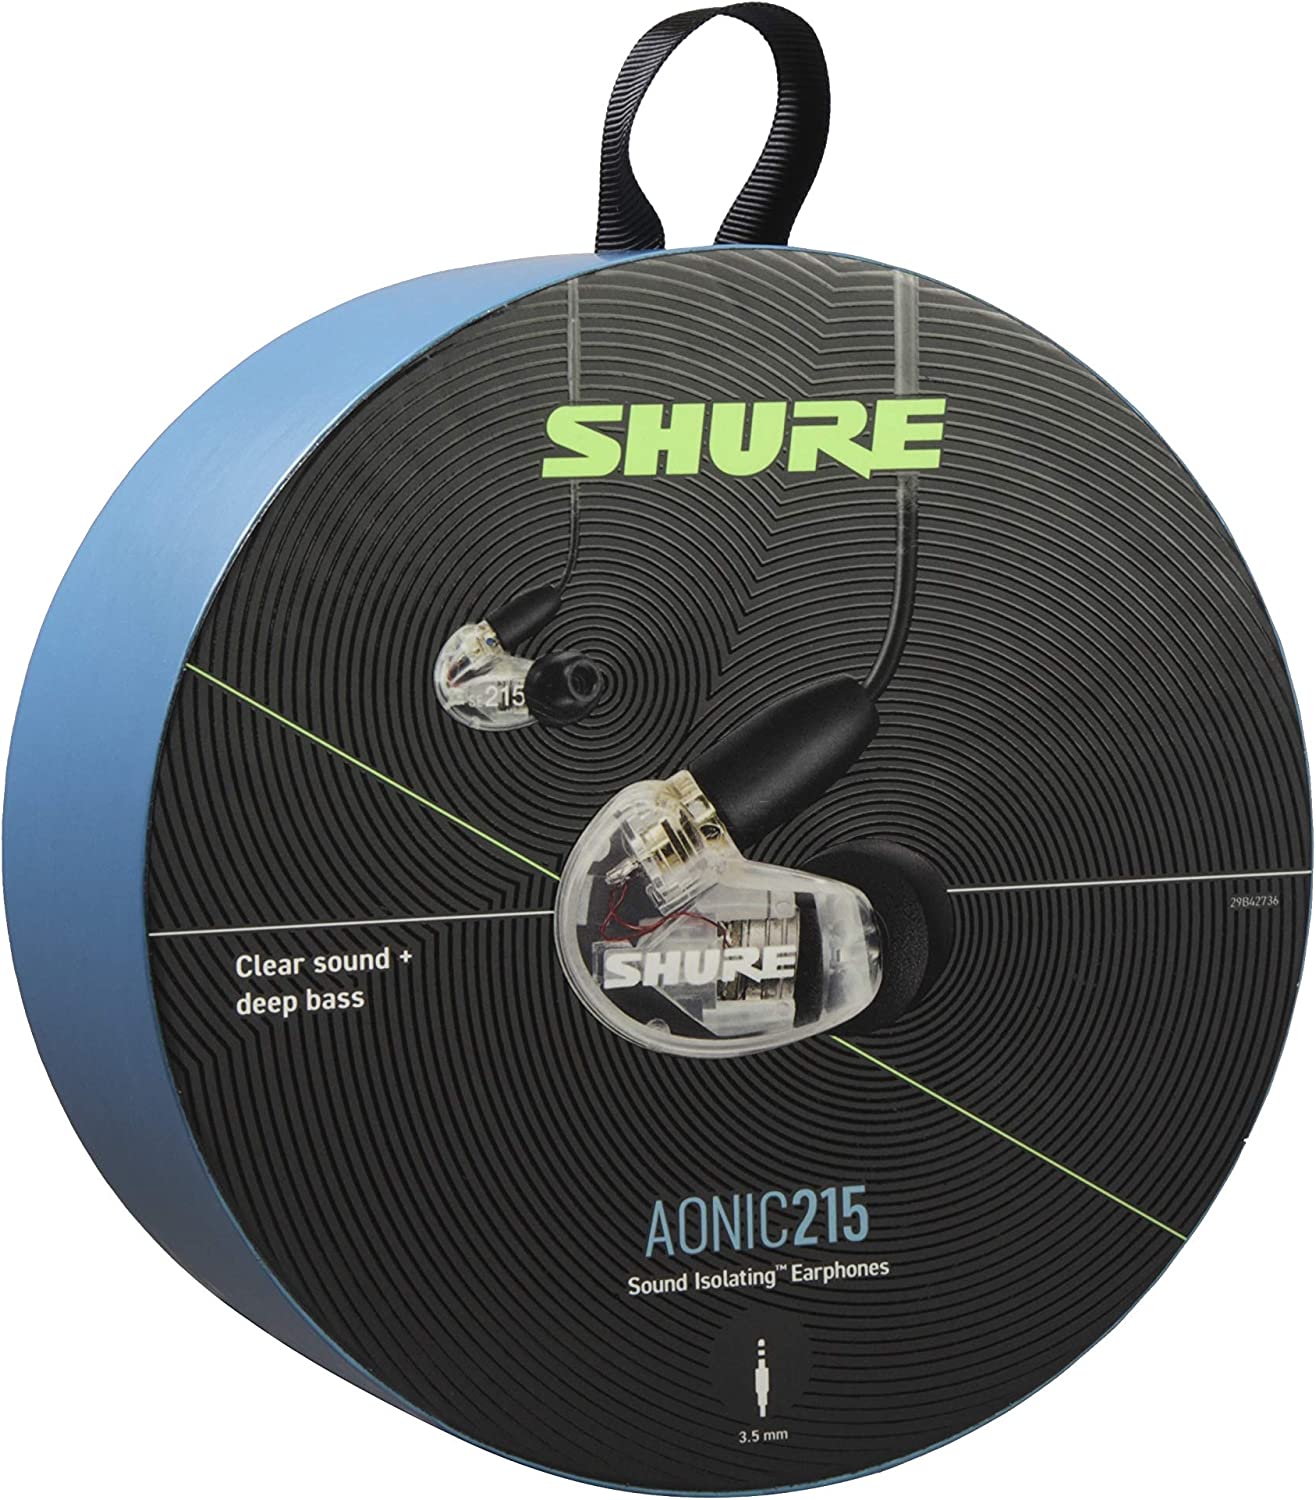 SHURE AONIC 215 SOUND ISOLATING EARPHONES - CLEAR